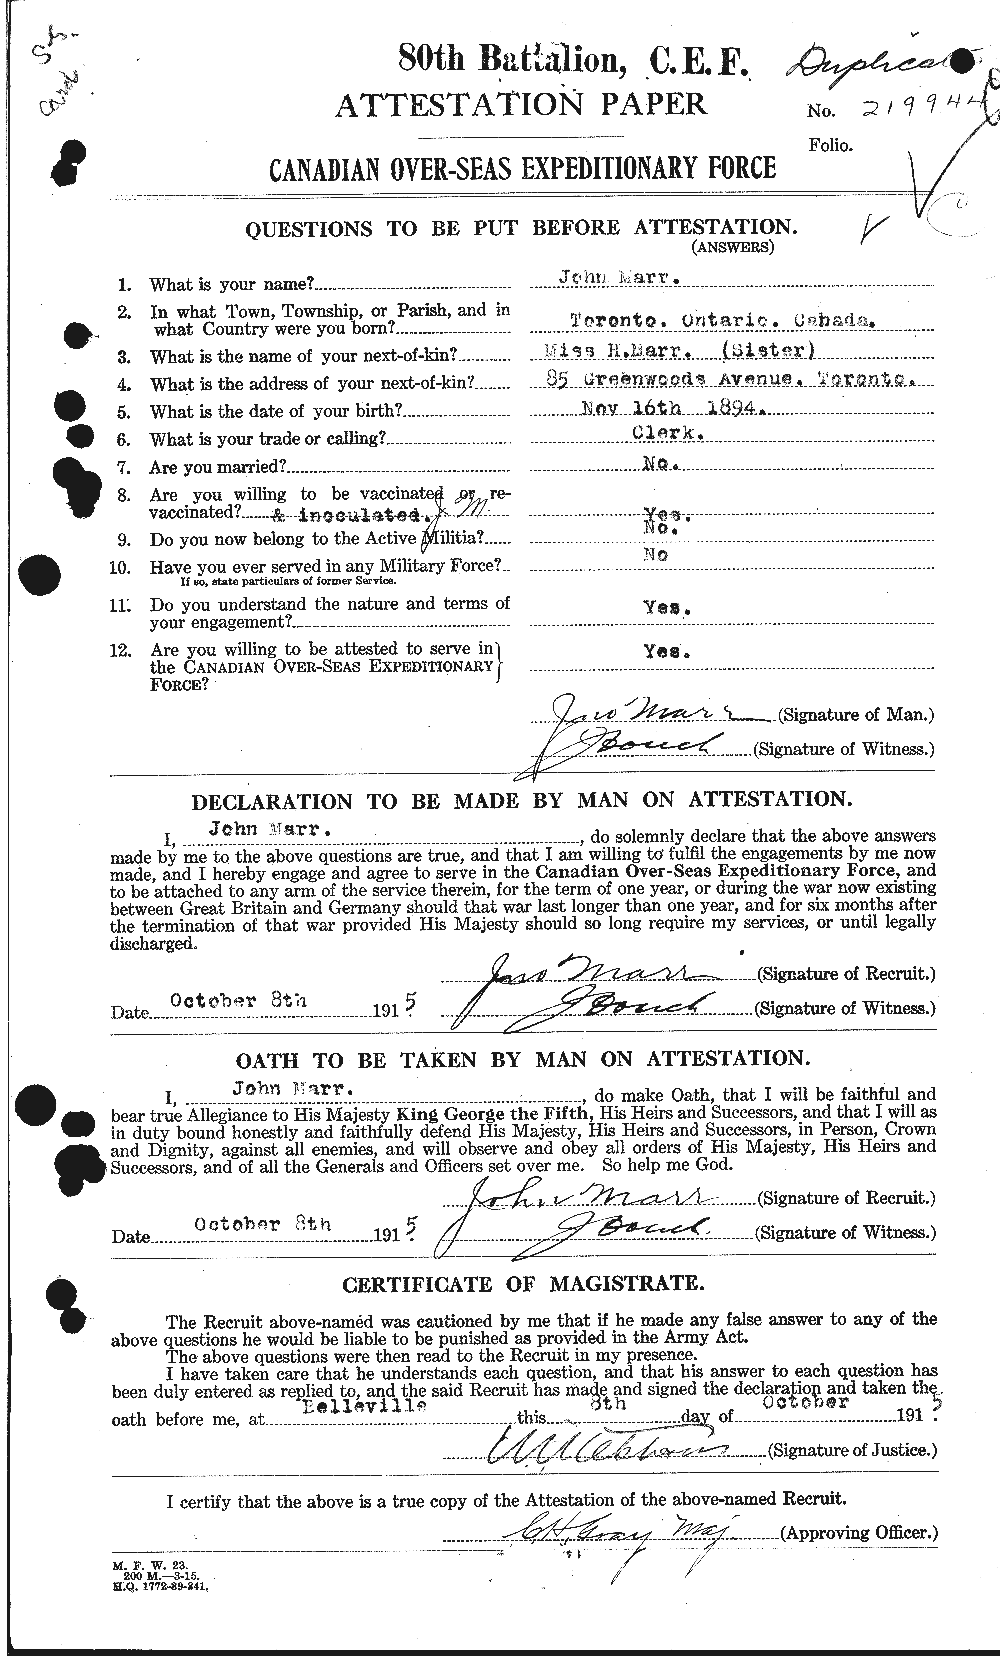 Personnel Records of the First World War - CEF 485658a